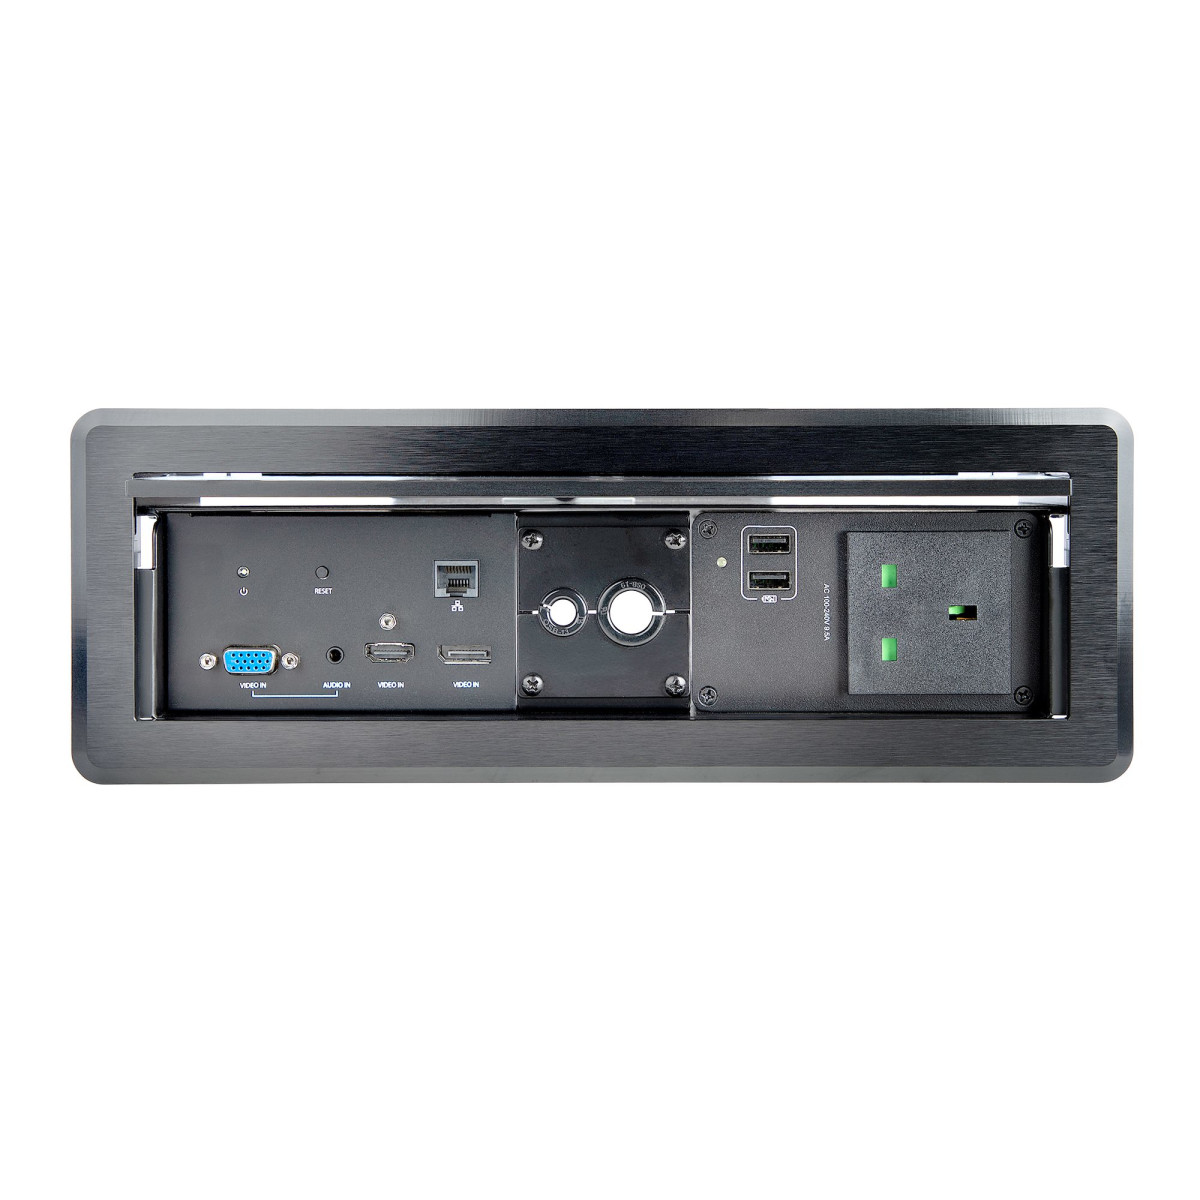 Conference Table Box for AV Connectivity